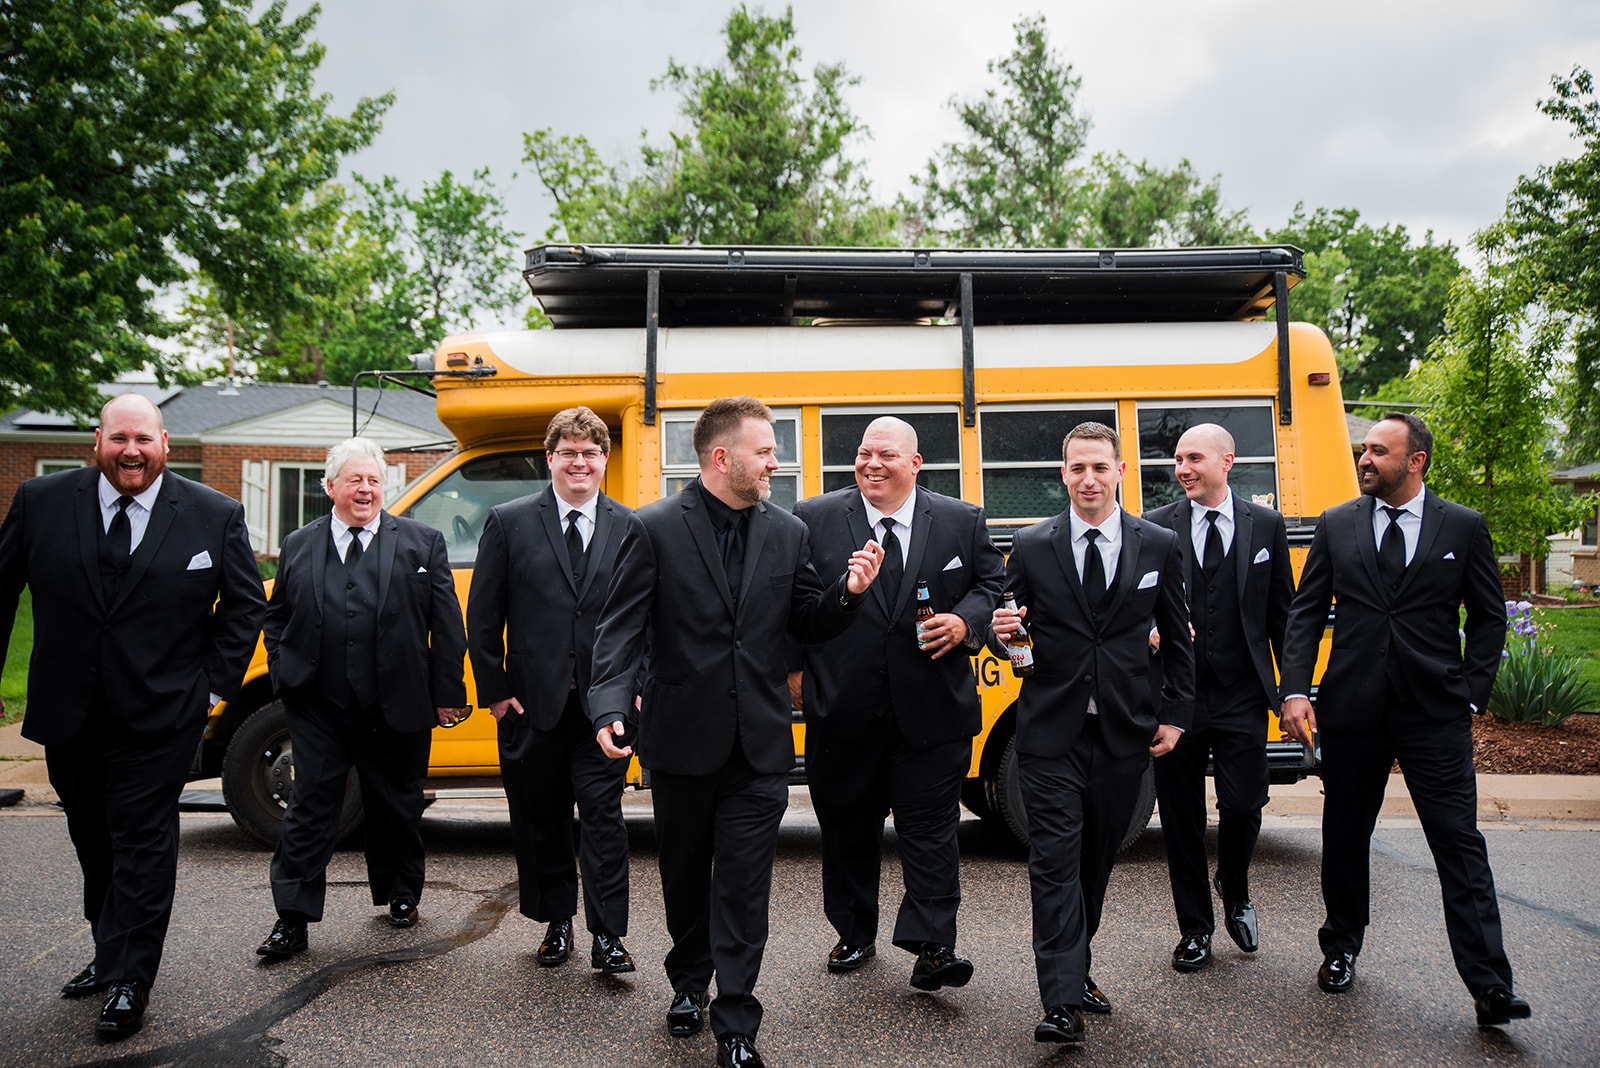 Groomsmen walk and talk with each other with school bus in the background.